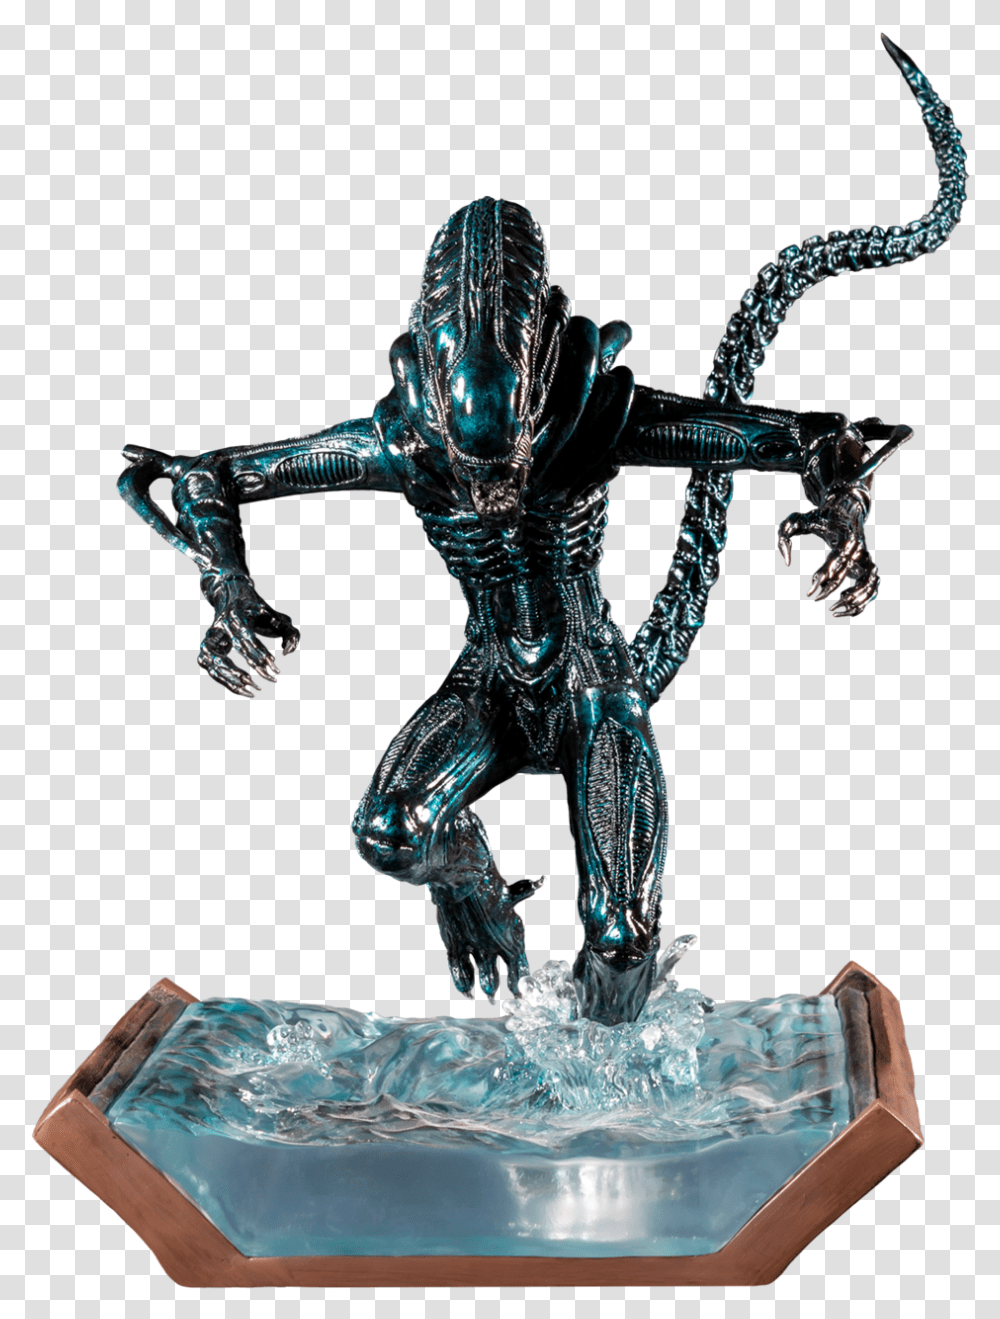 Alien In Water Statue New Paint 1 306 Aliens Water Attack Statue, Crystal, Trophy, Figurine, Cross Transparent Png